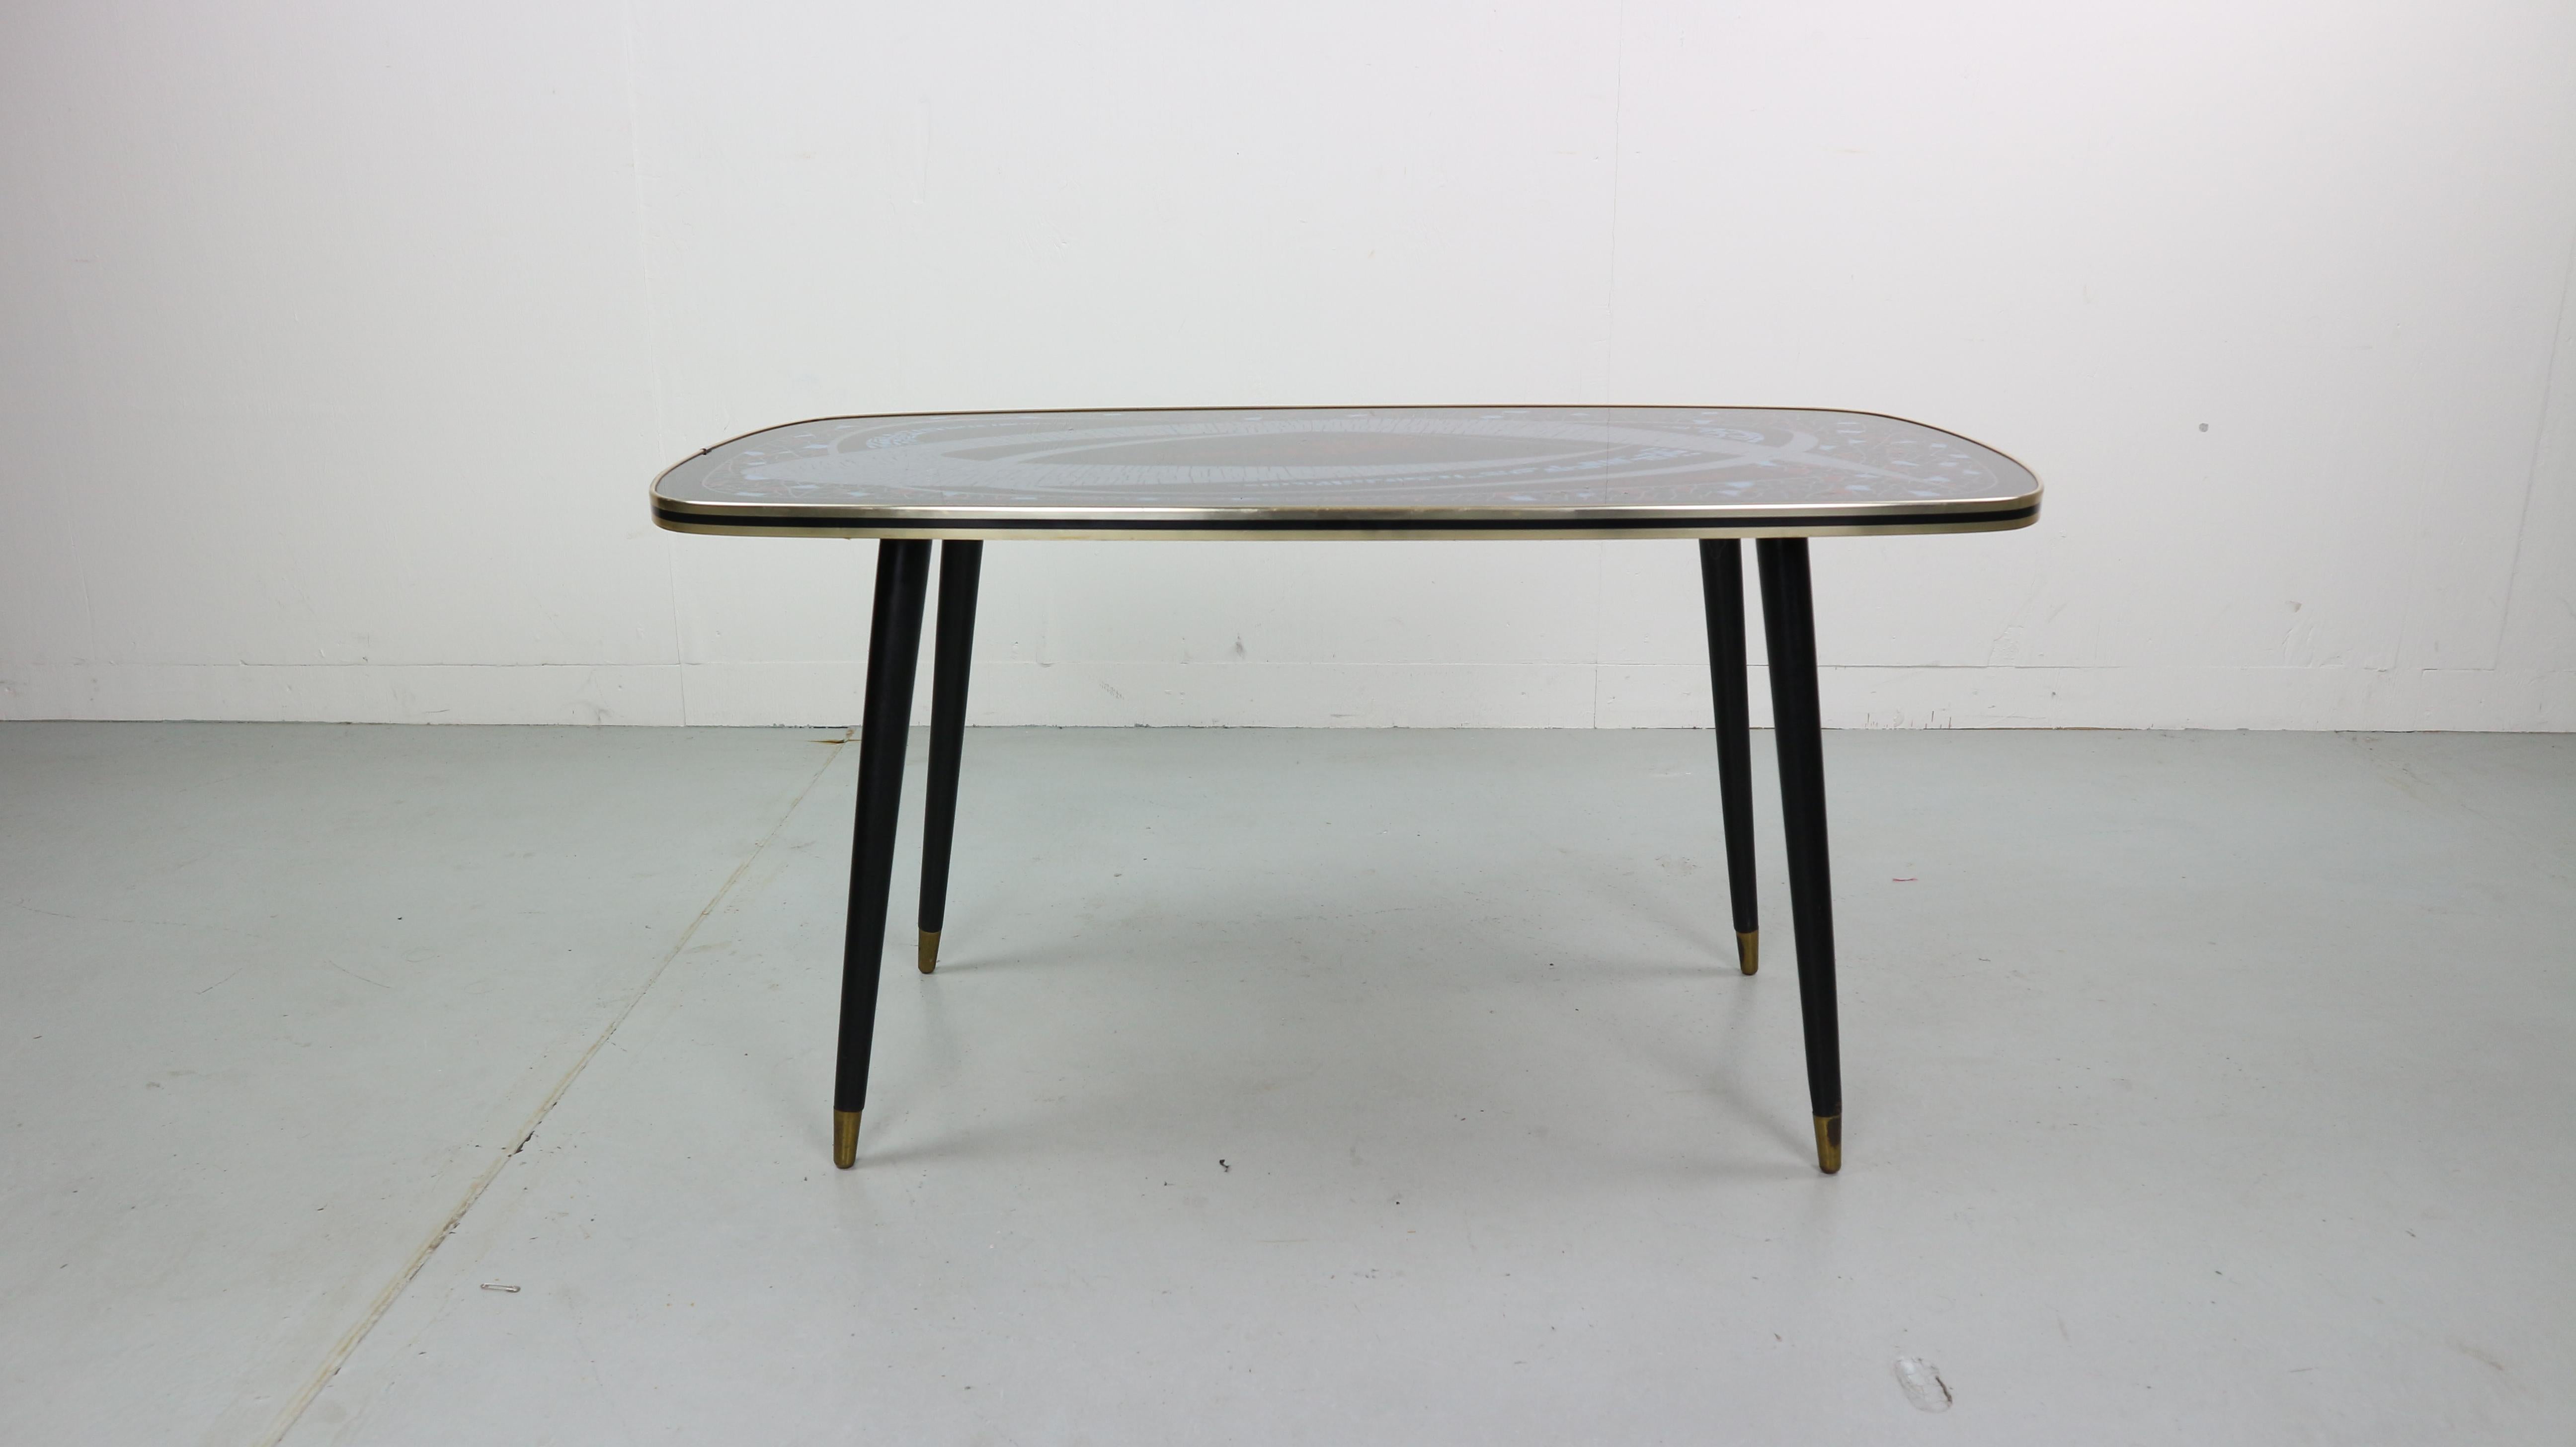 French Cocktail Table 1950s Atomic Graphic Design Tabletop and Brass Feet